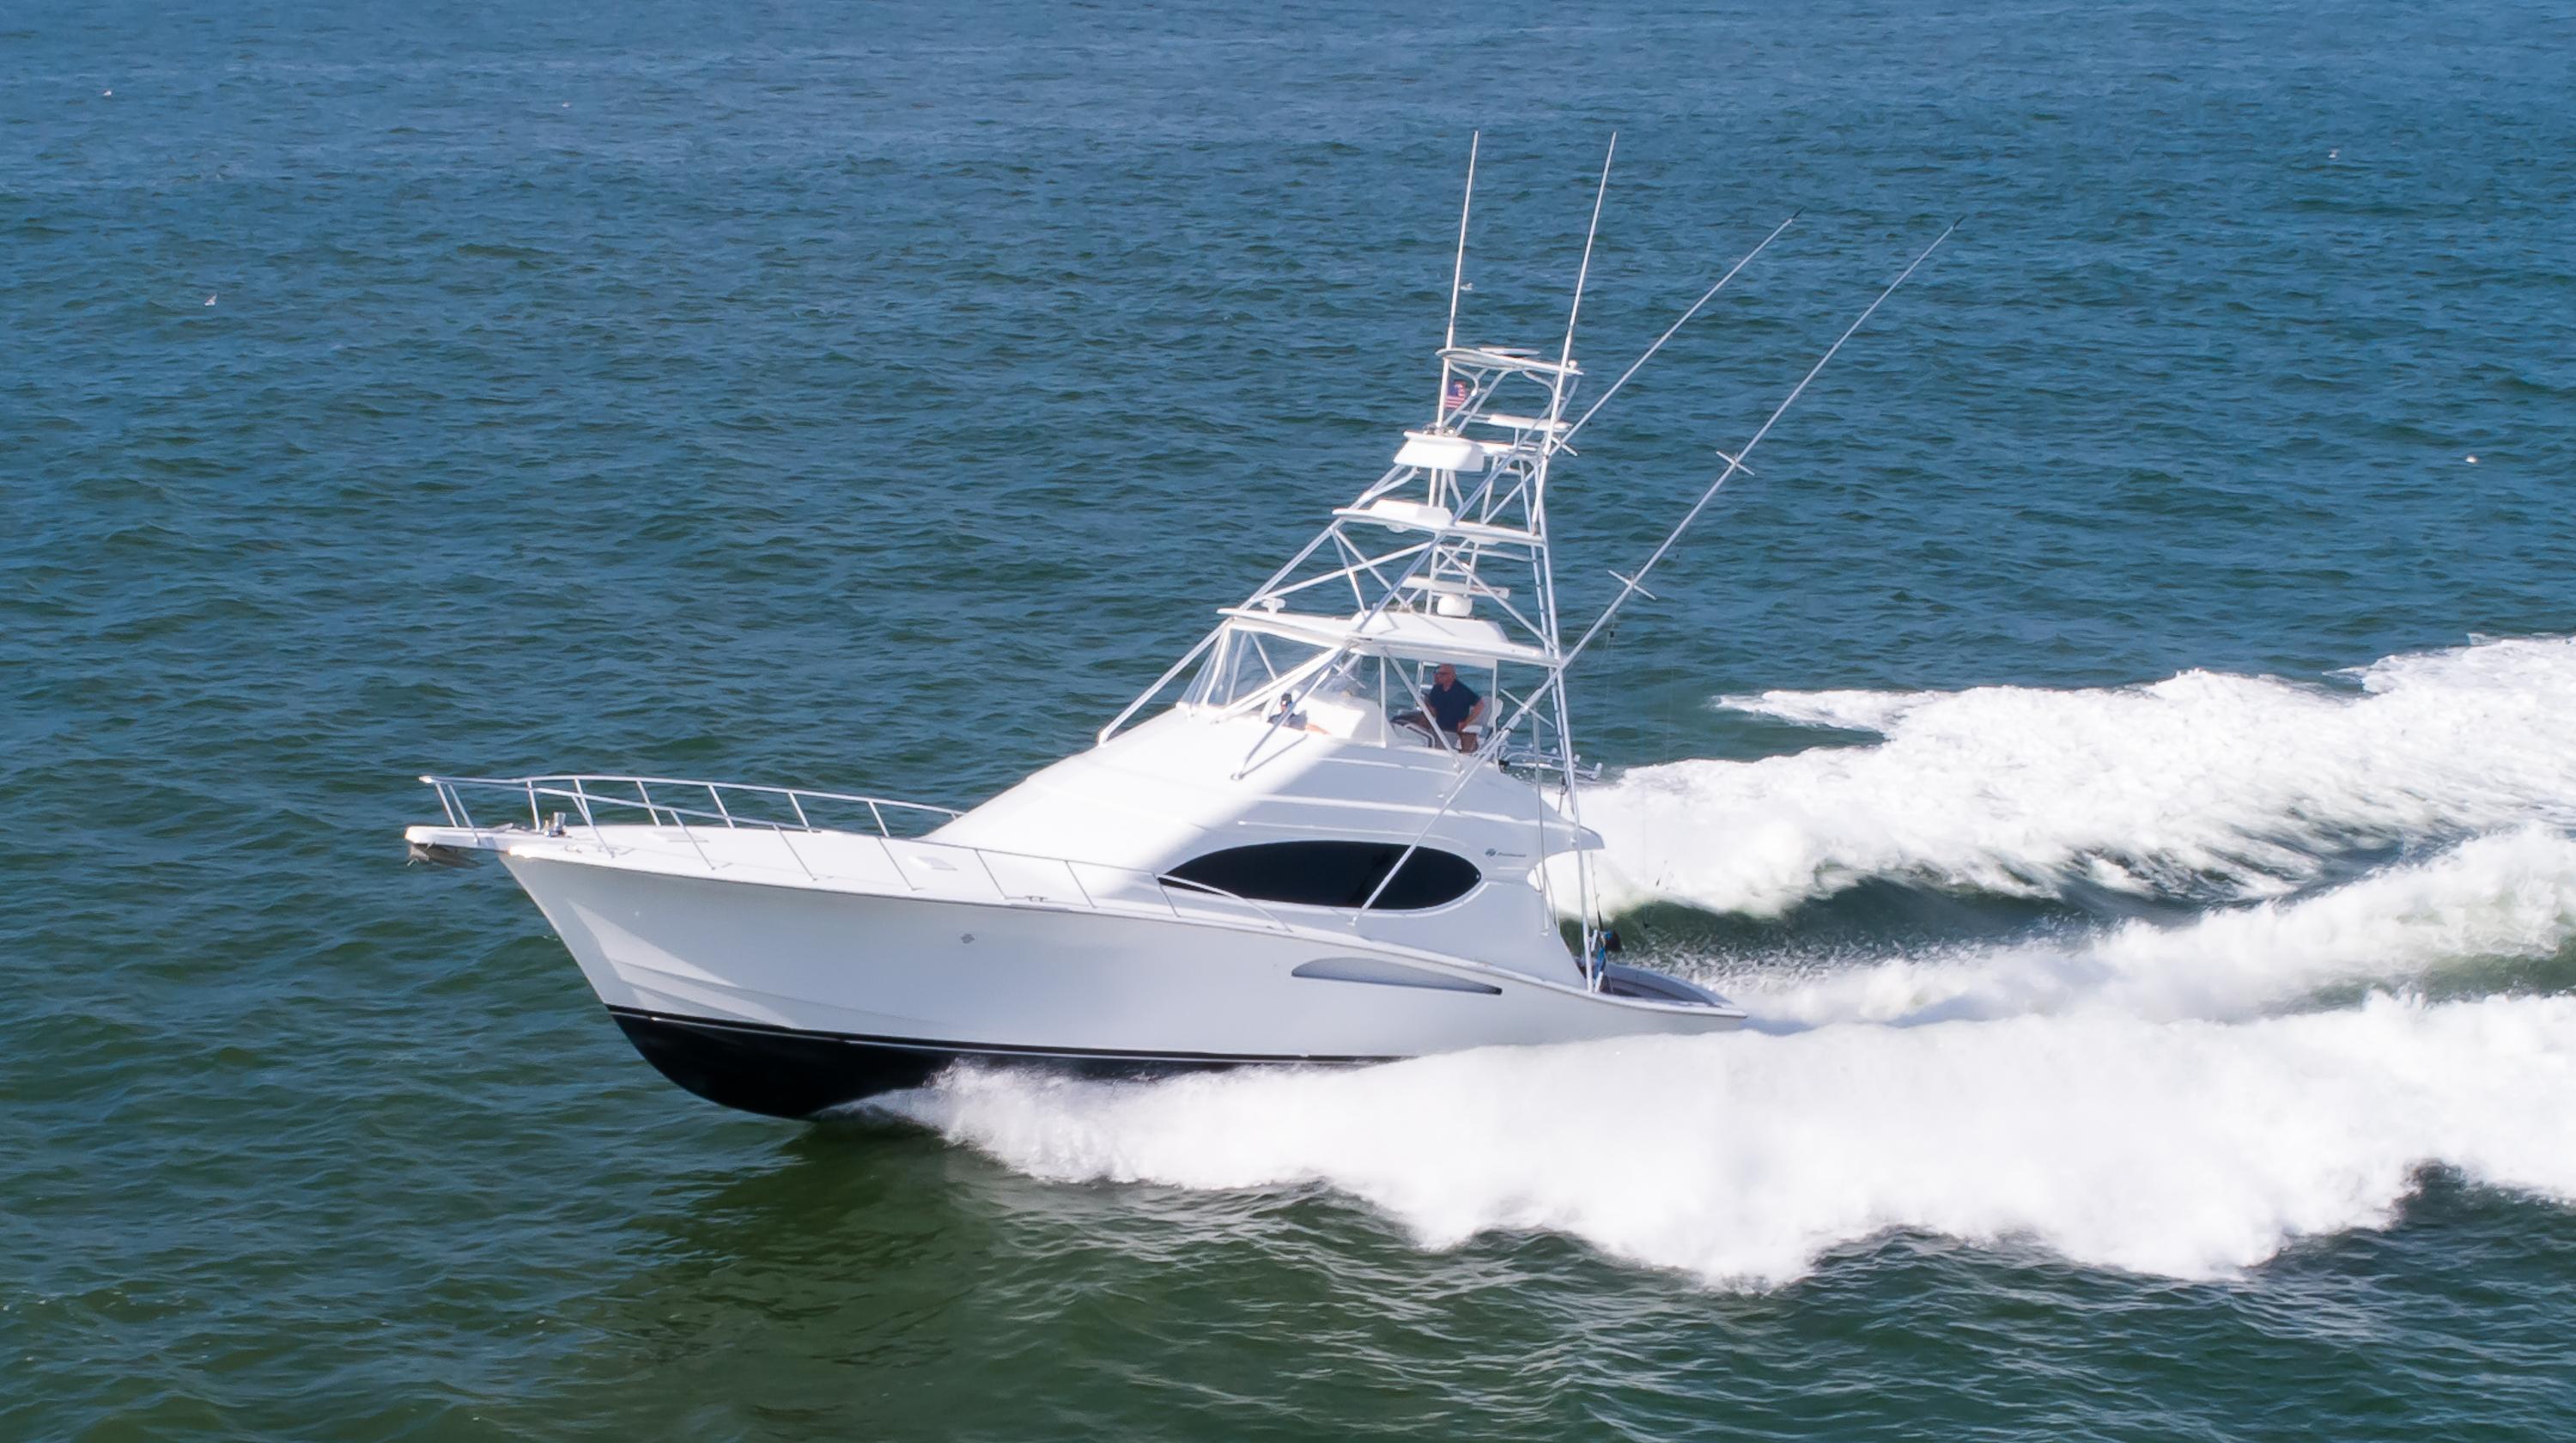 South Jersey Yacht Sales - New & Pre-Owned Yacht Sales & Services